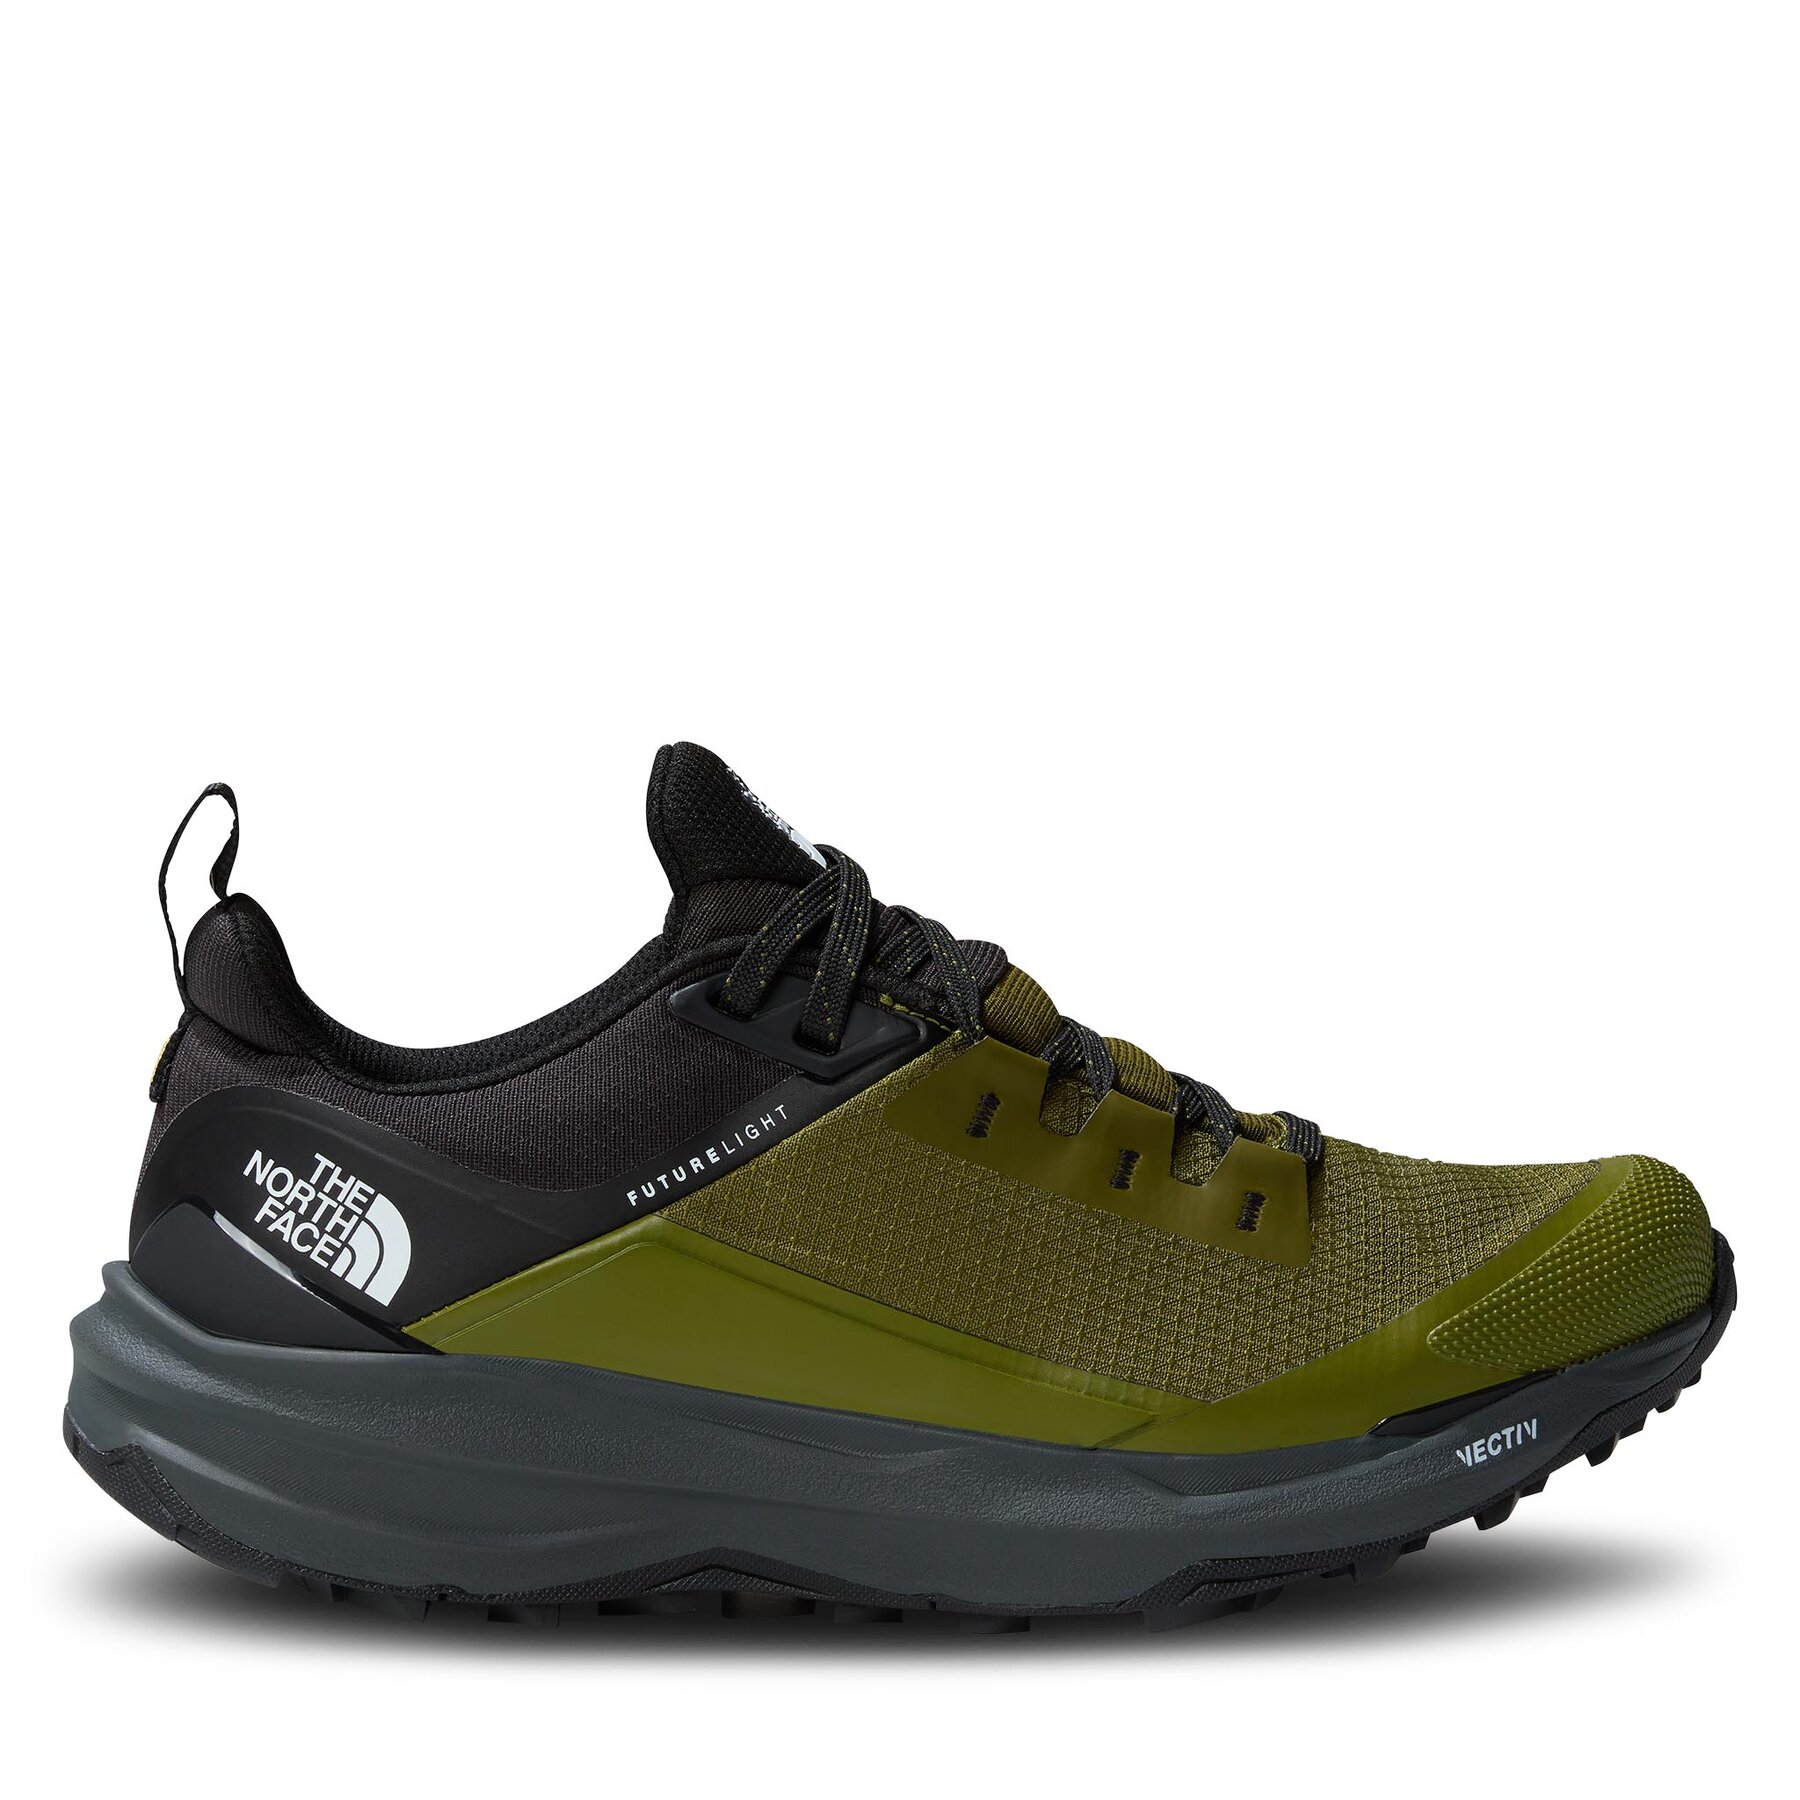 Trekkingschuhe The North Face Vectiv Exploris 2 NF0A7W6CRMO1 Forest Olive/Tnf Black von The North Face